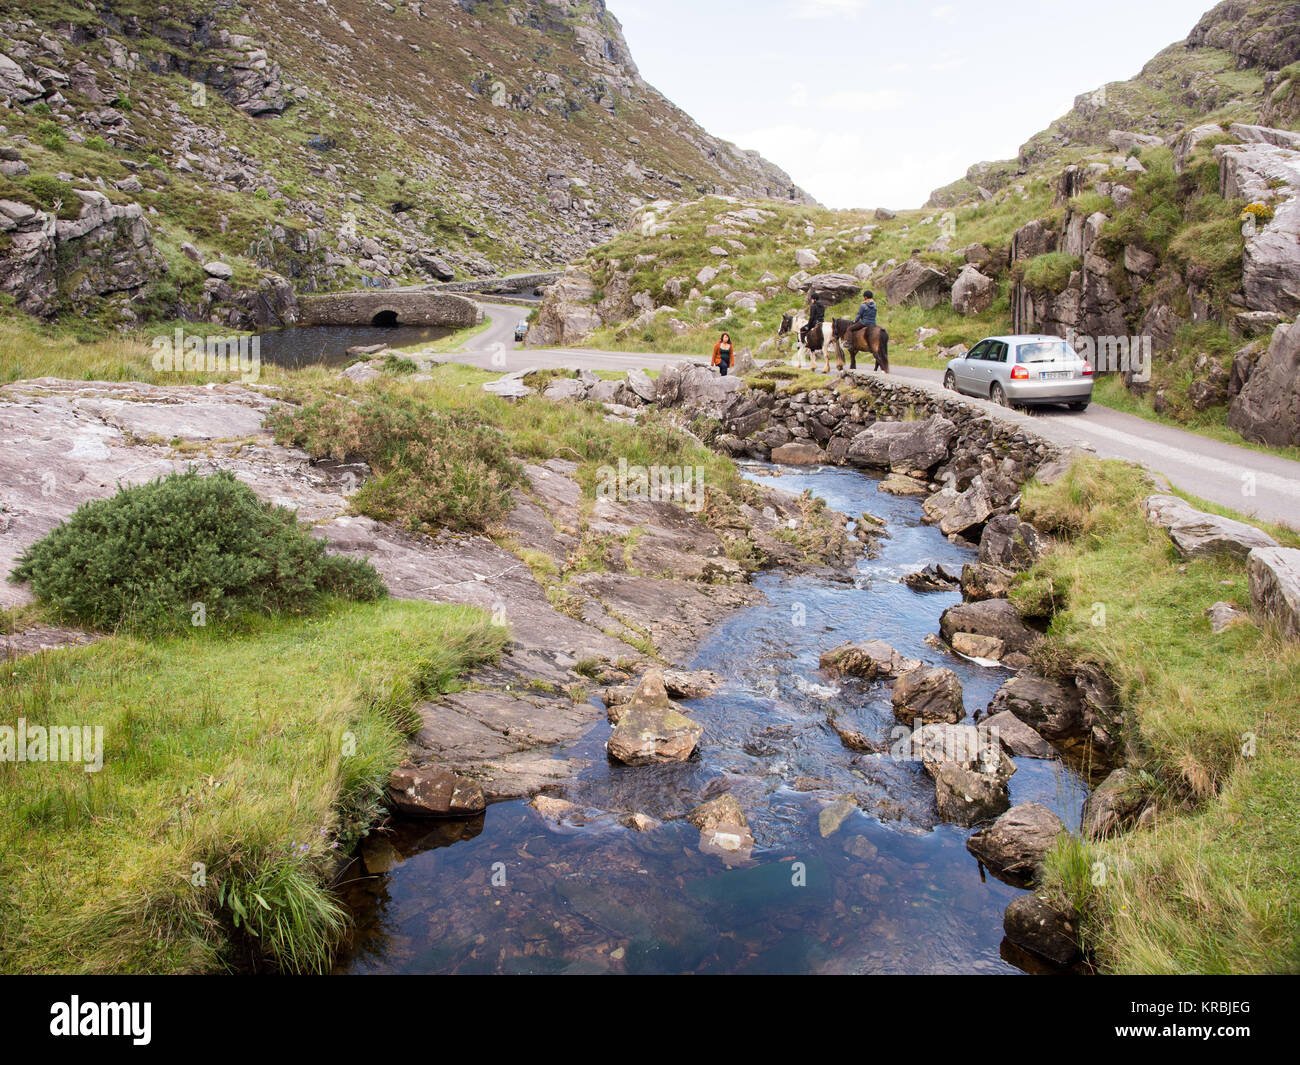 The River Loe and narrow mountain pass road wind through the steep valley of the Gap of Dunloe, nestled in the Macgillycuddy's Reeks mountains of Irel Stock Photo